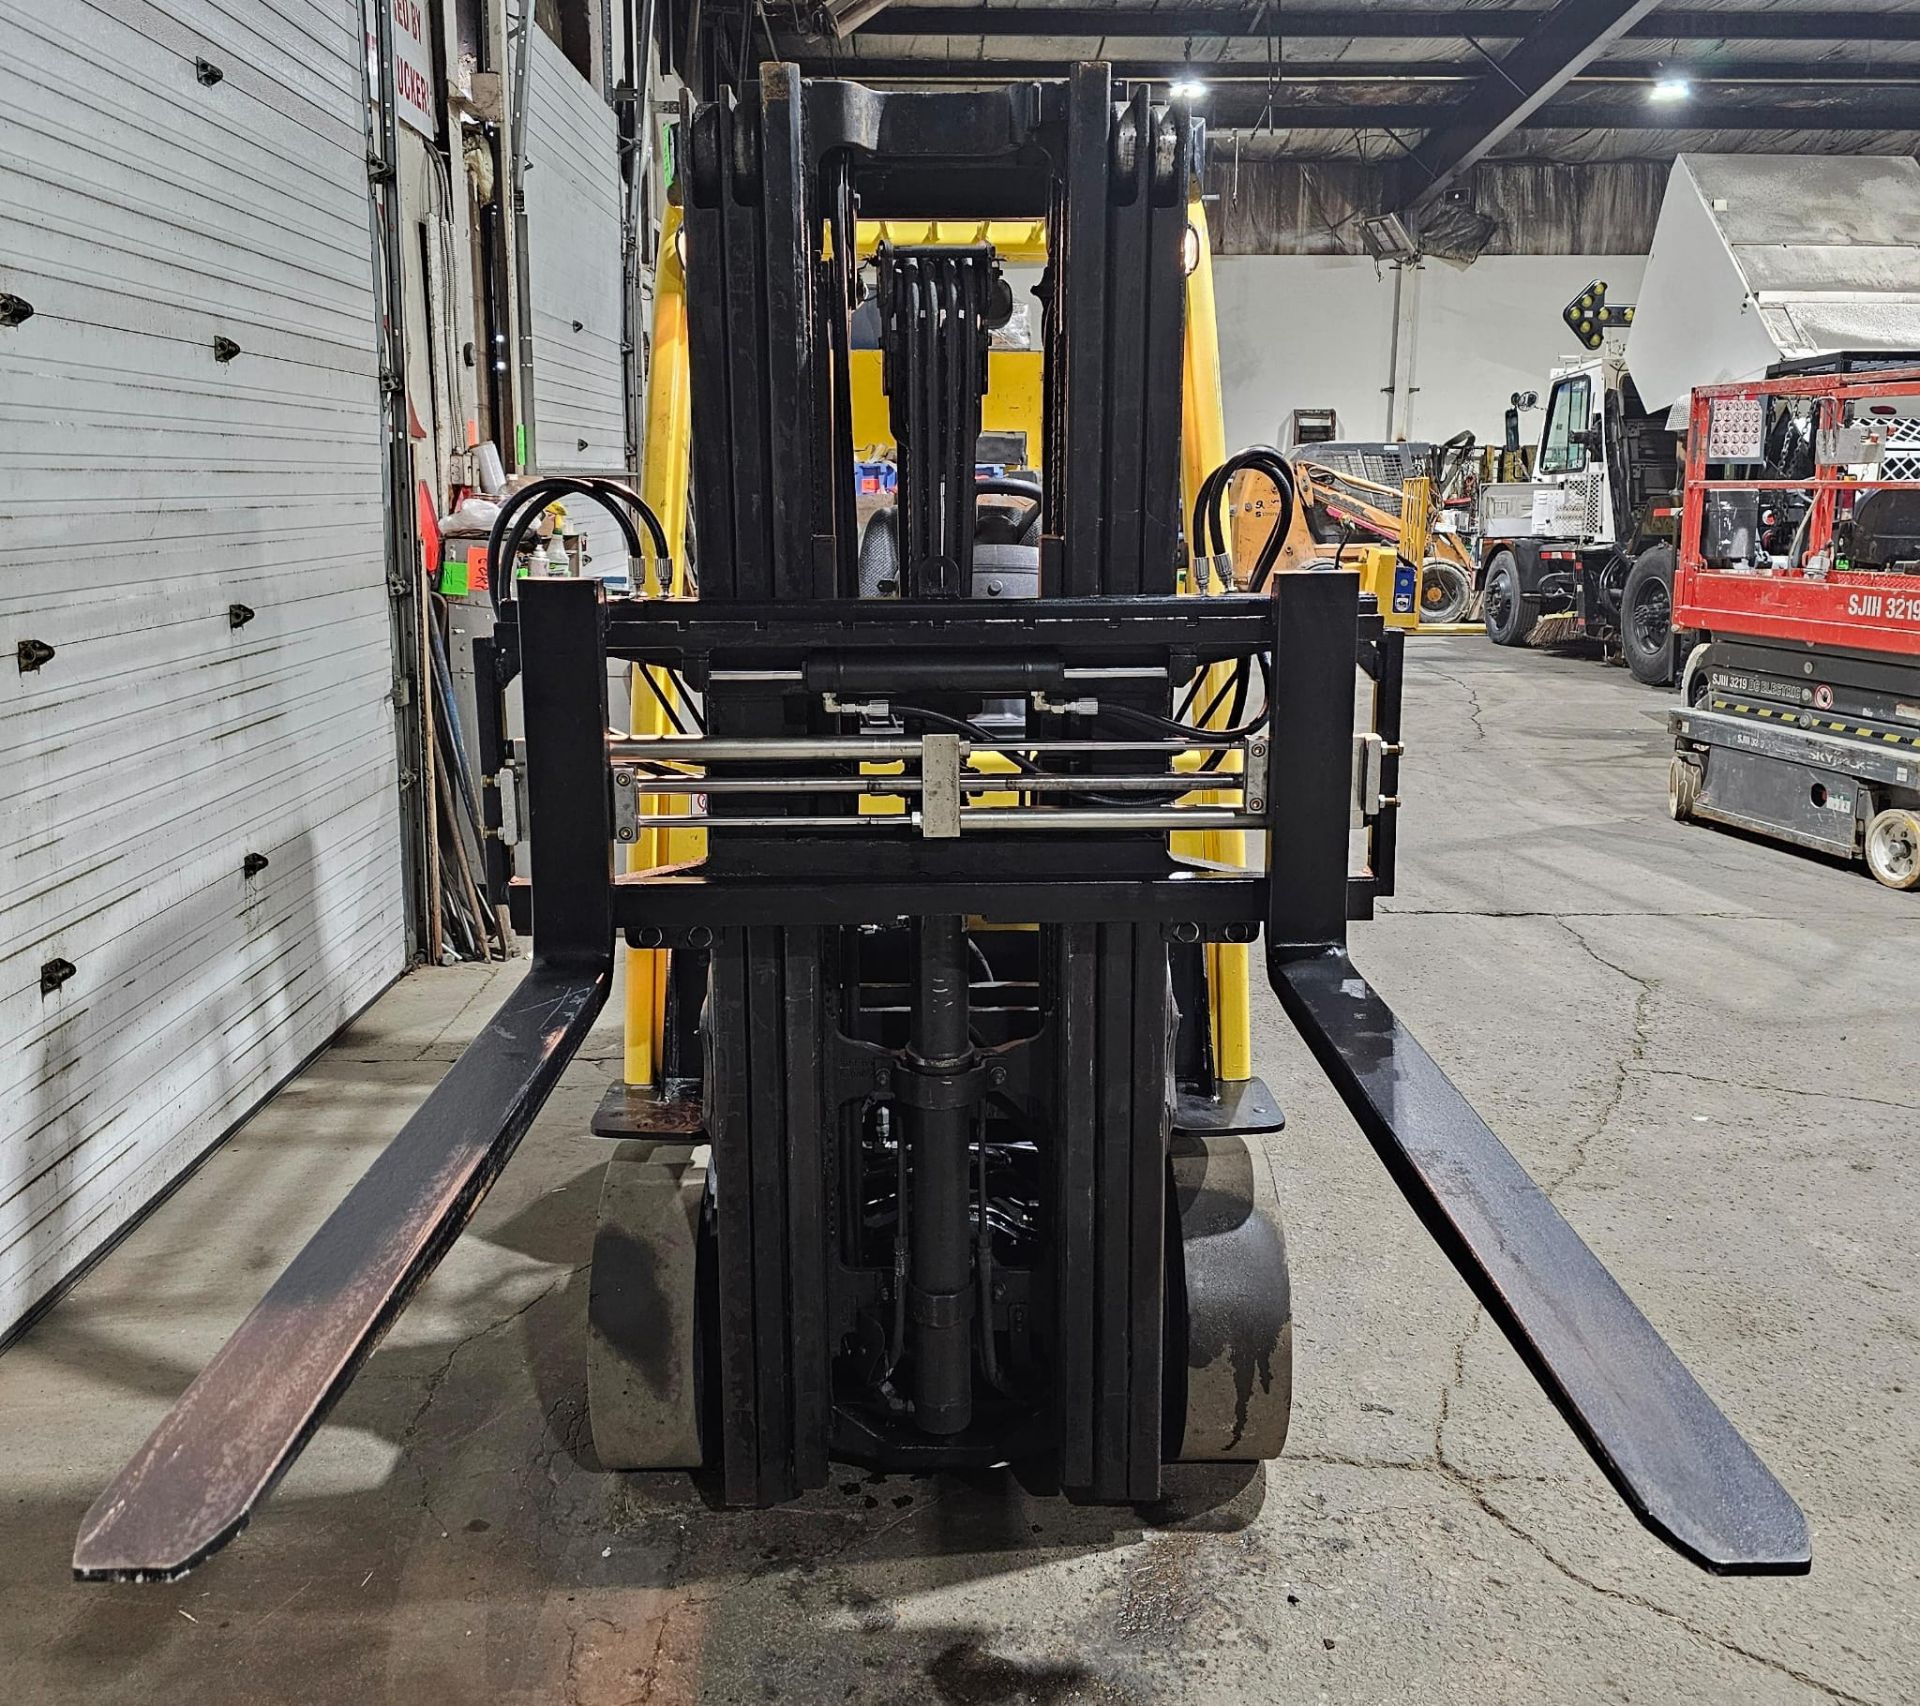 2019 Hyster 4,000lbs Capacity LPG (Propane) Forklift with sideshift 3-Stage Mast(no propane tank - Image 5 of 5